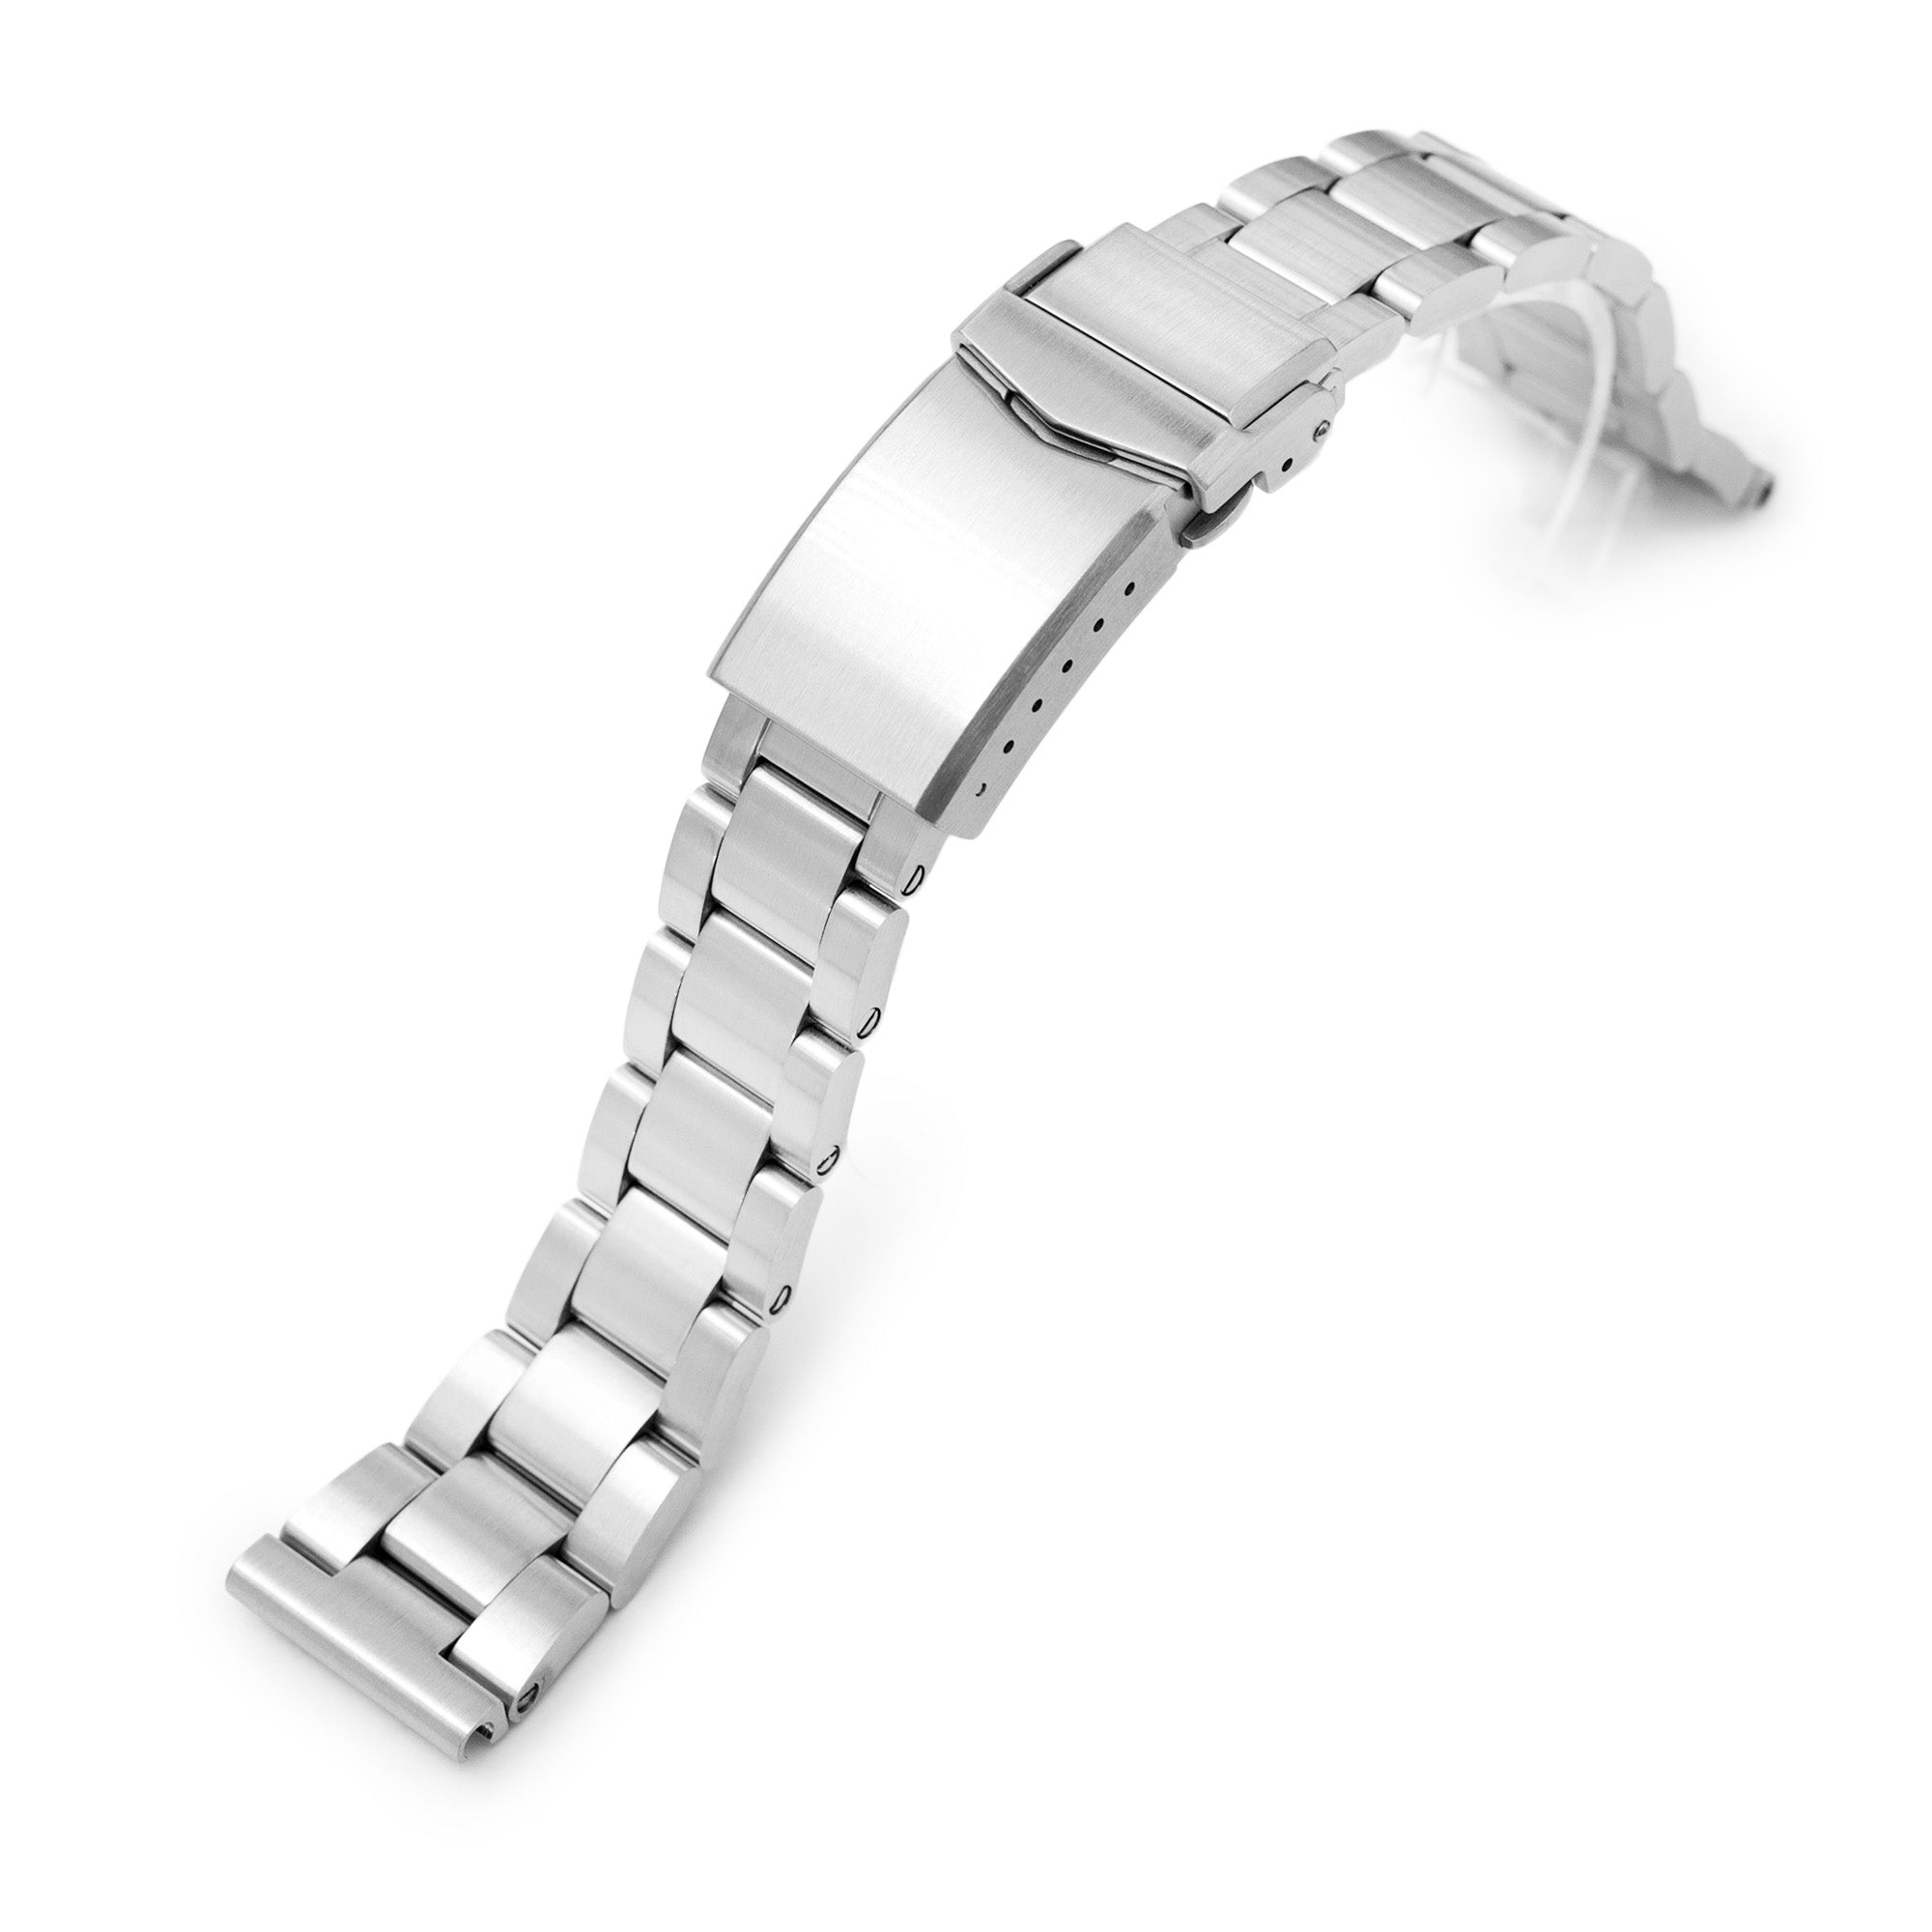 20mm Super Boyer Watch Band Straight End, 316L Stainless Steel Brushed V-Clasp Strapcode Watch Bands